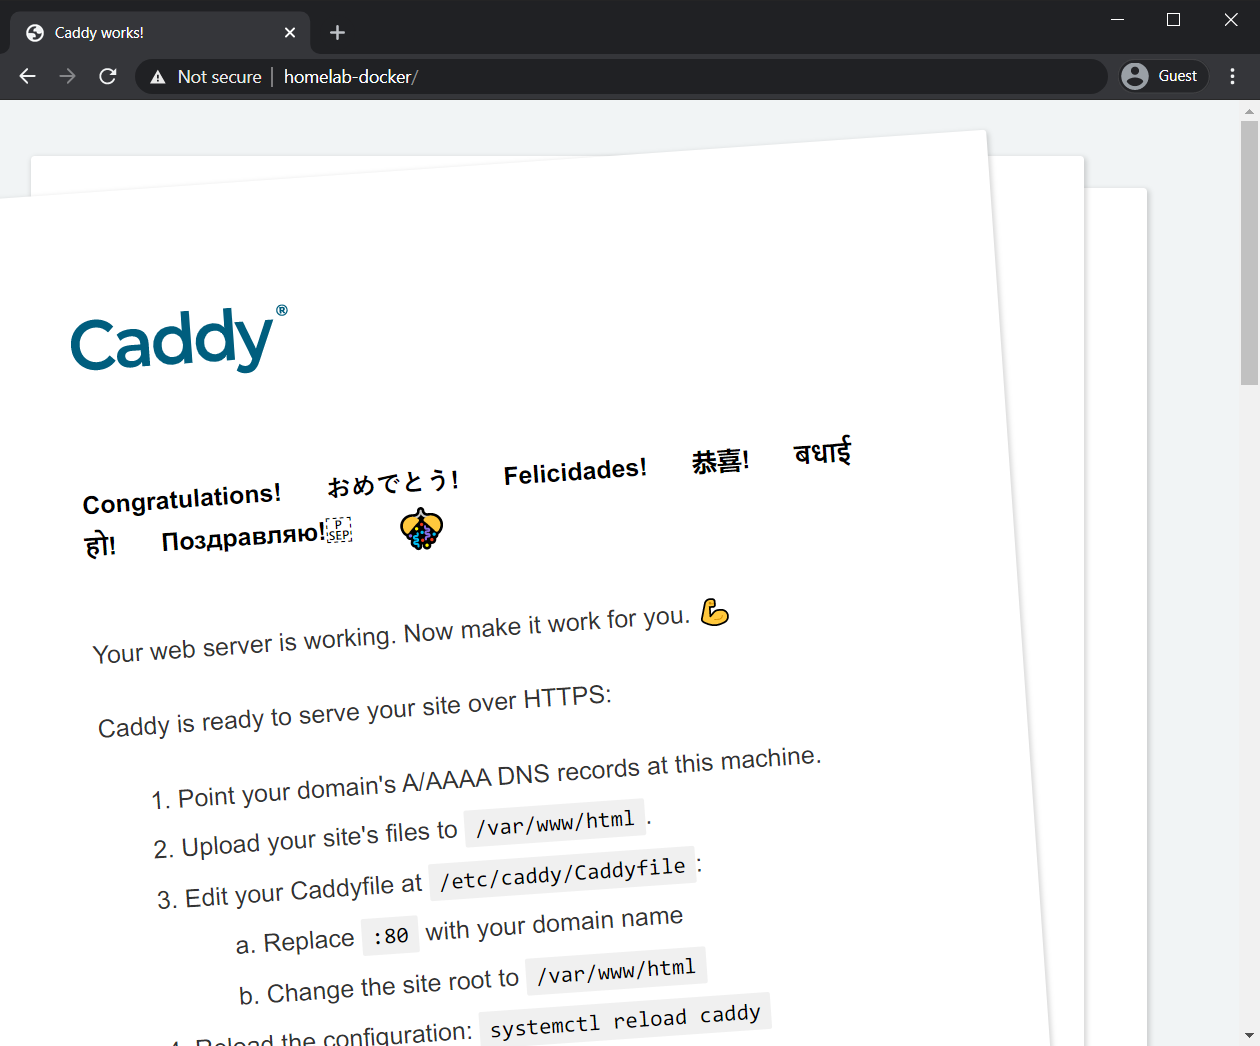 The default landing page for Caddy